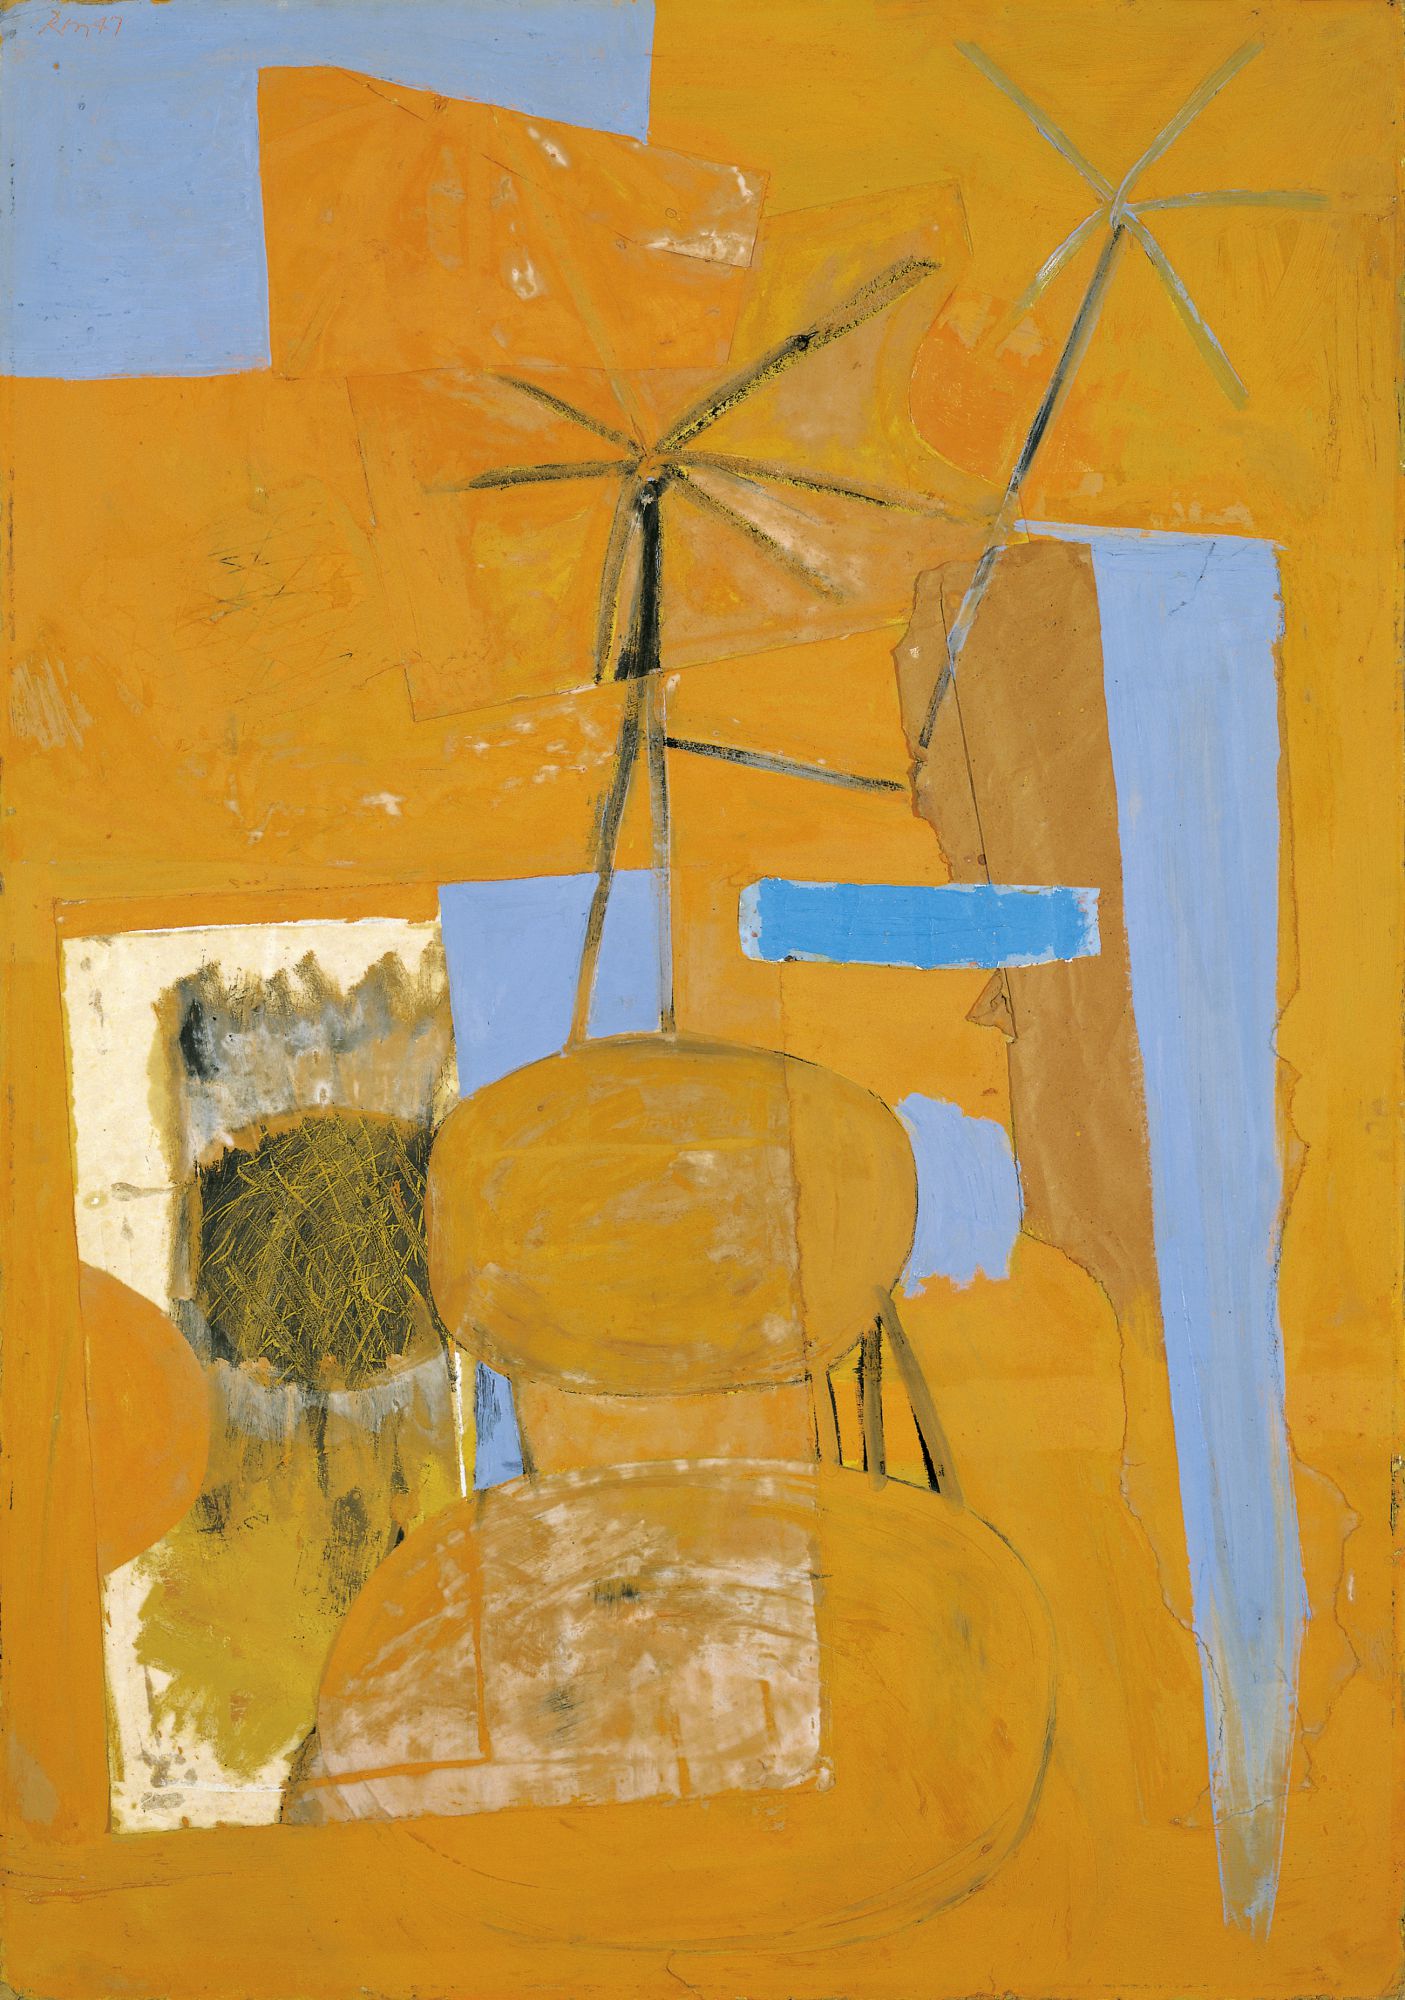 The Poet, 1947. Oil and pasted papers on board, 55 3/8 x 39 1/8 inches (140.7 x 99.4 cm)